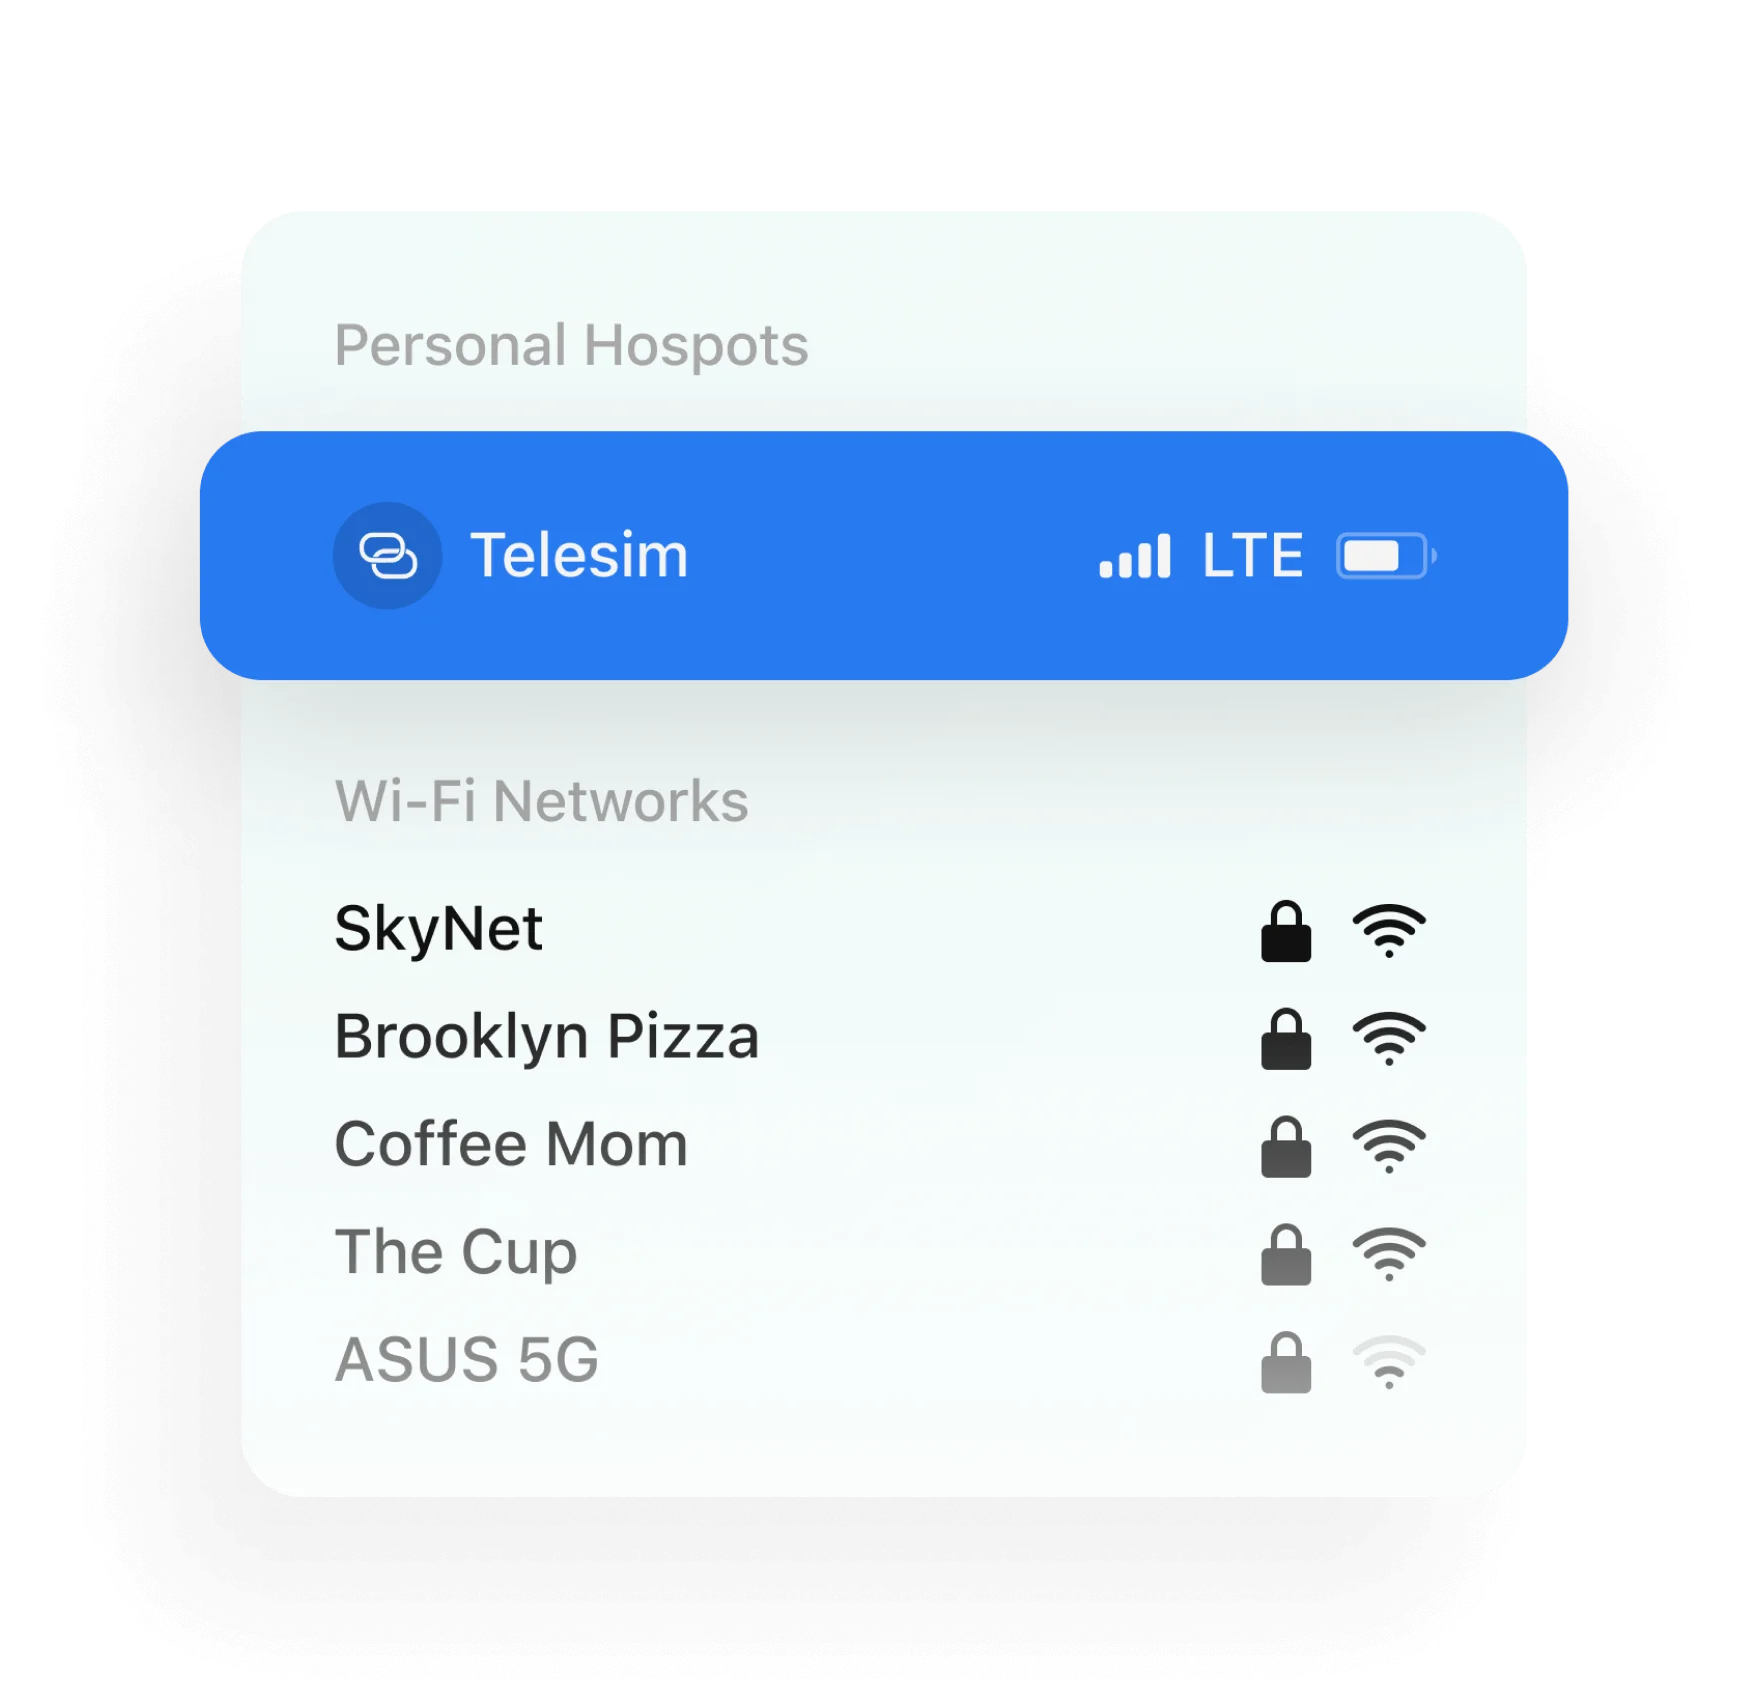 Your personal Hotspot